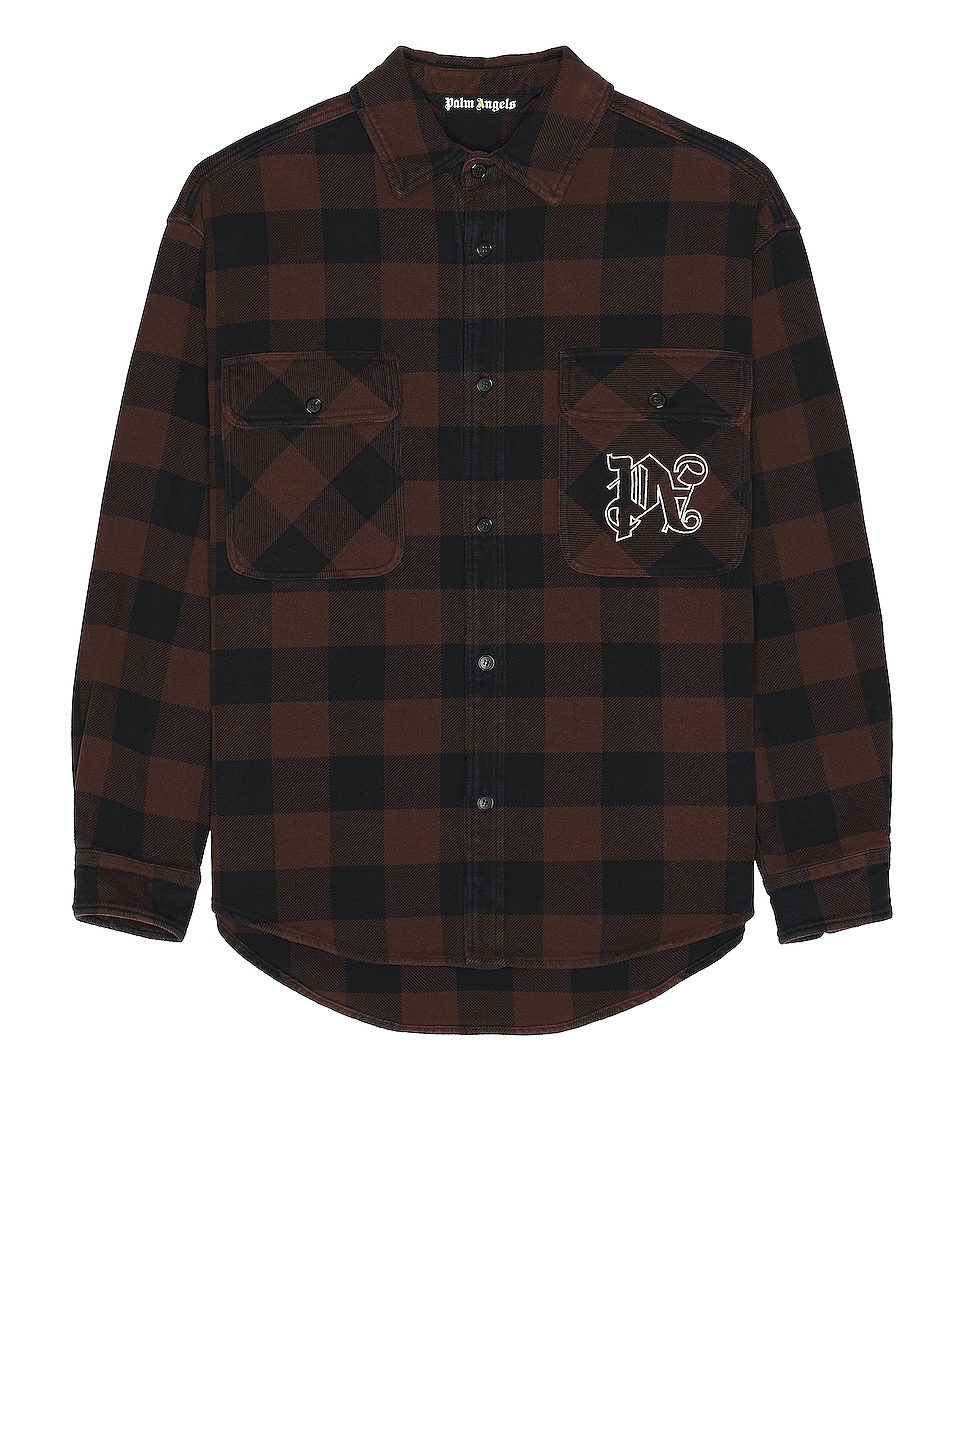 Image 1 of Palm Angels Check Overshirt in Brown